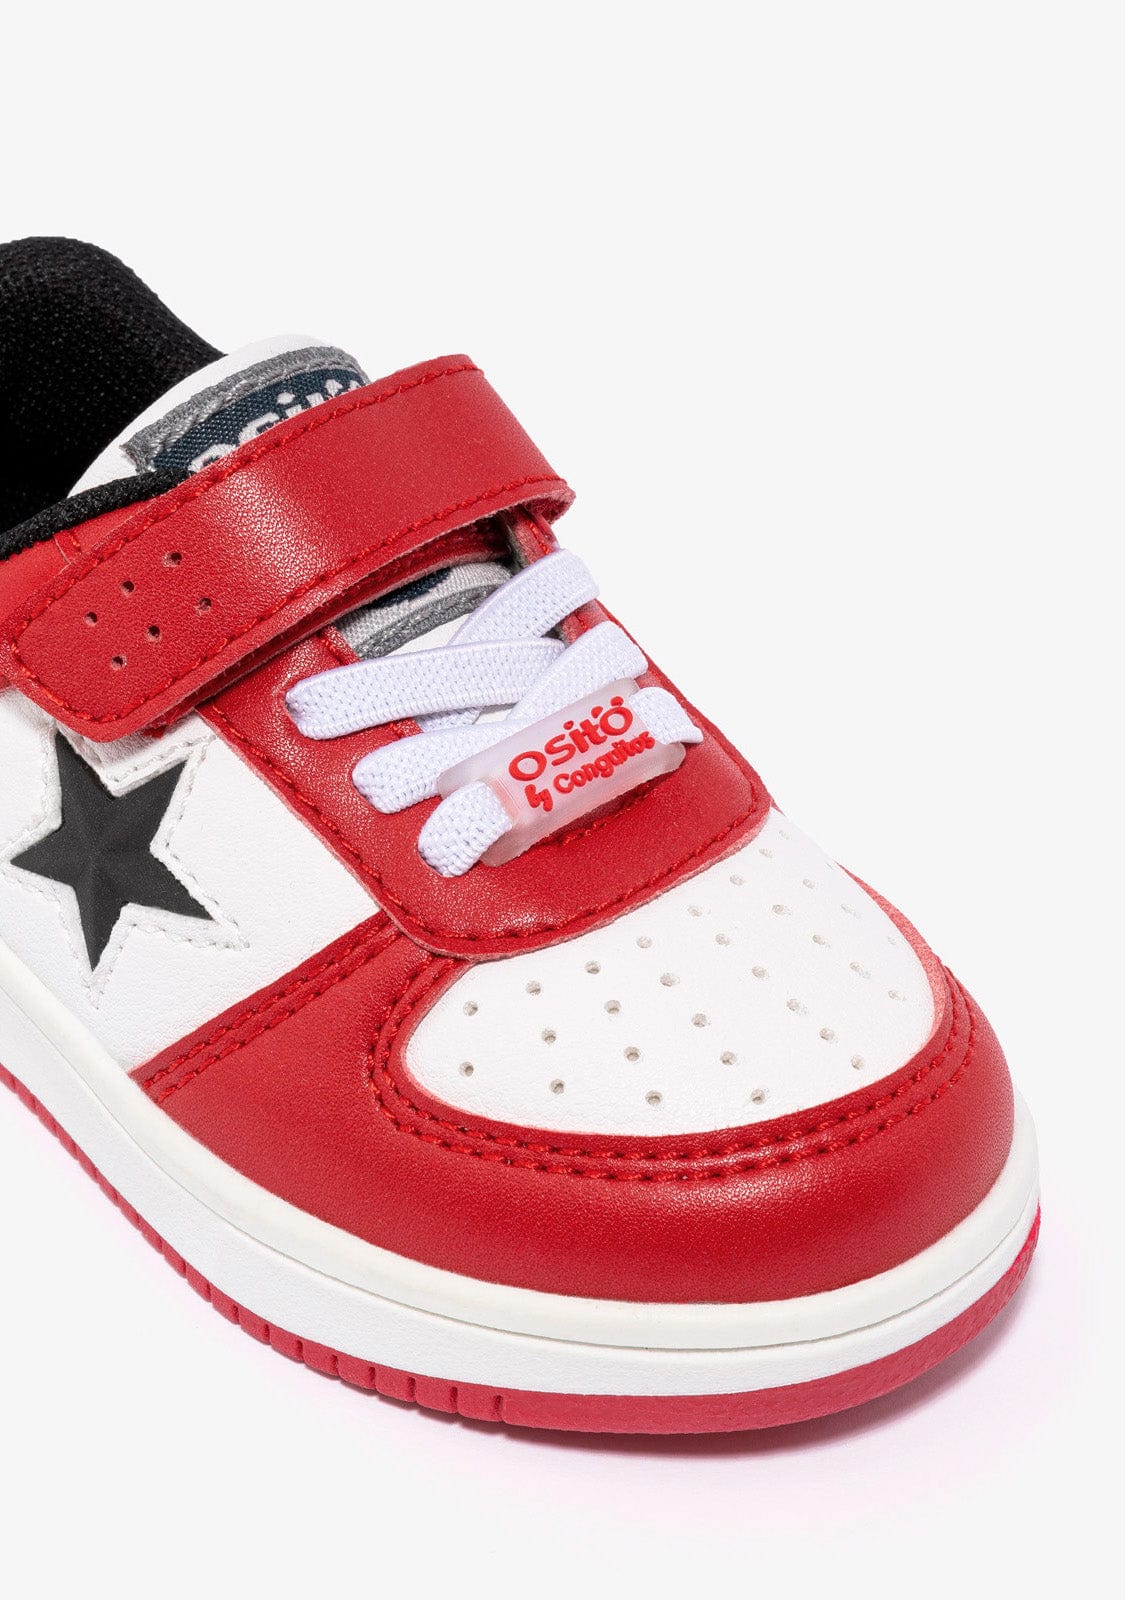 OSITO Shoes Baby's Red / White Star With Lights Sneakers